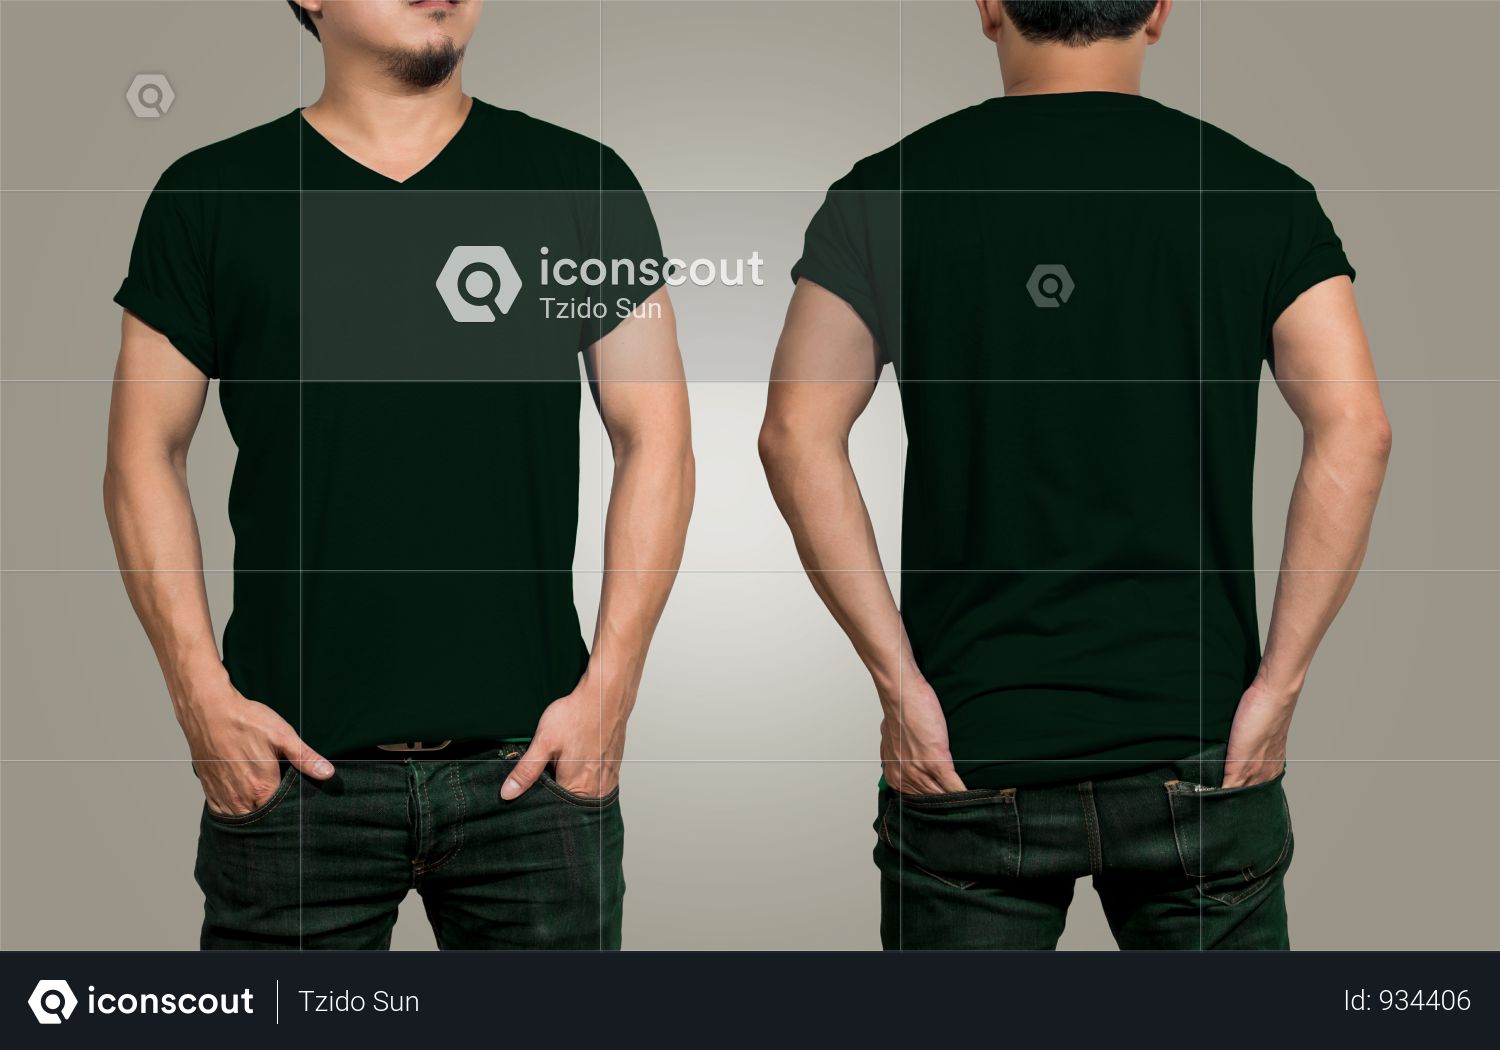 Premium T-shirt Mockup With Front And Back View Photo download in PNG & JPG format